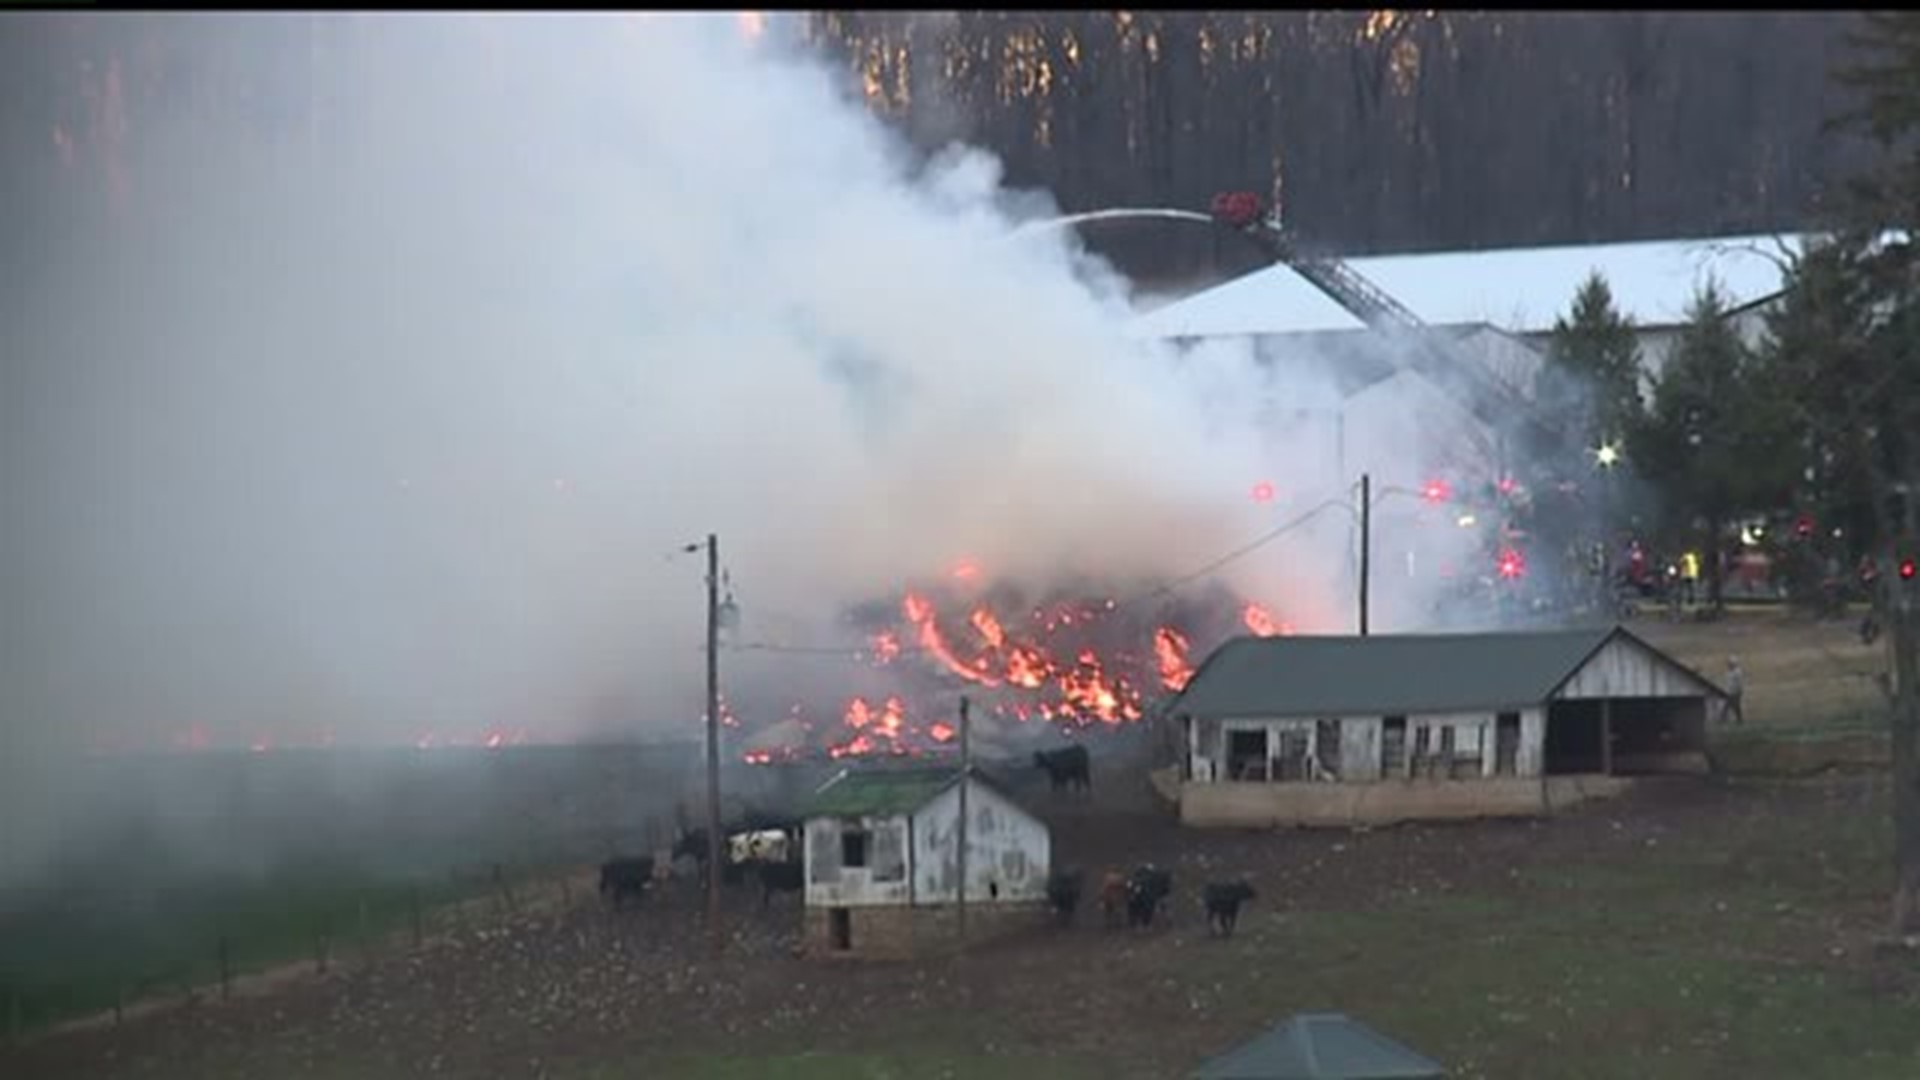 Crews spend hours battling barn fire in York County